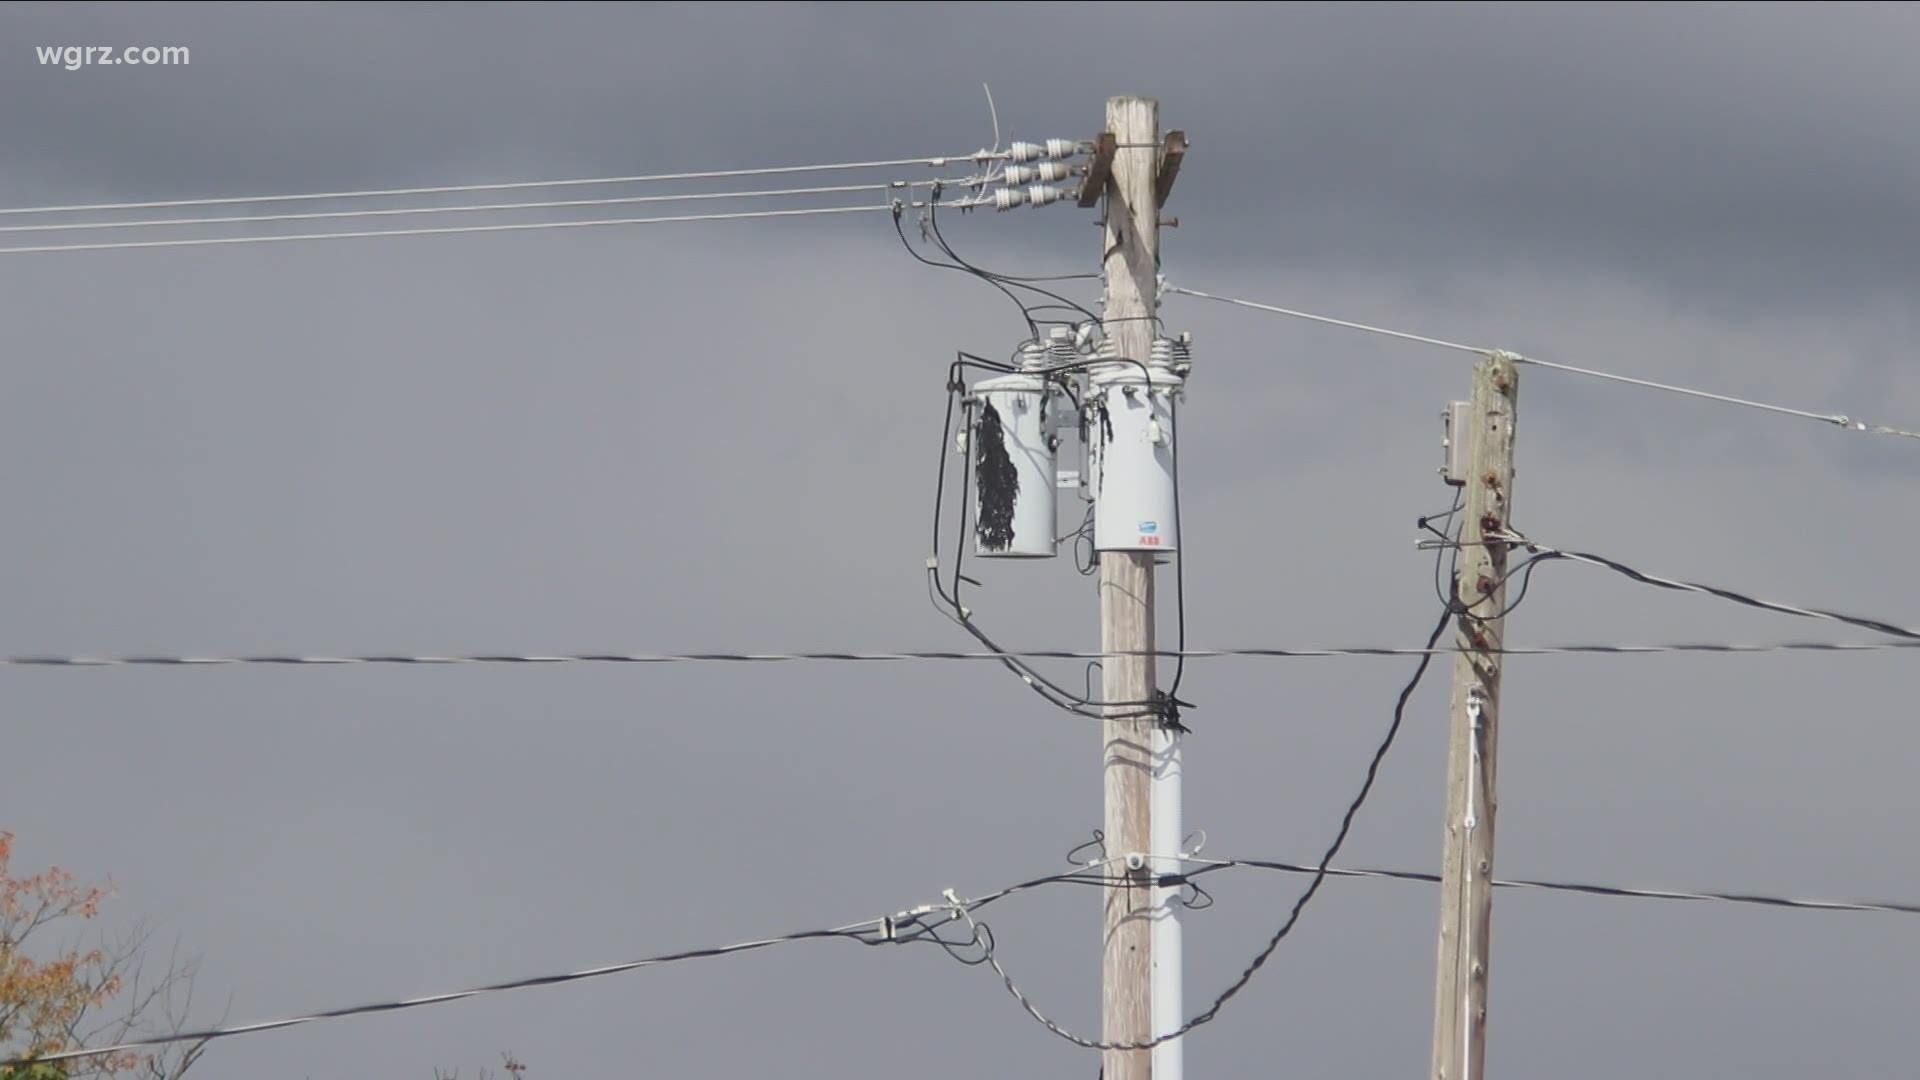 Fees to access utility poles have skyrocketed in New York State in recent years, lawmakers passed a bill aimed to reign in those fees.